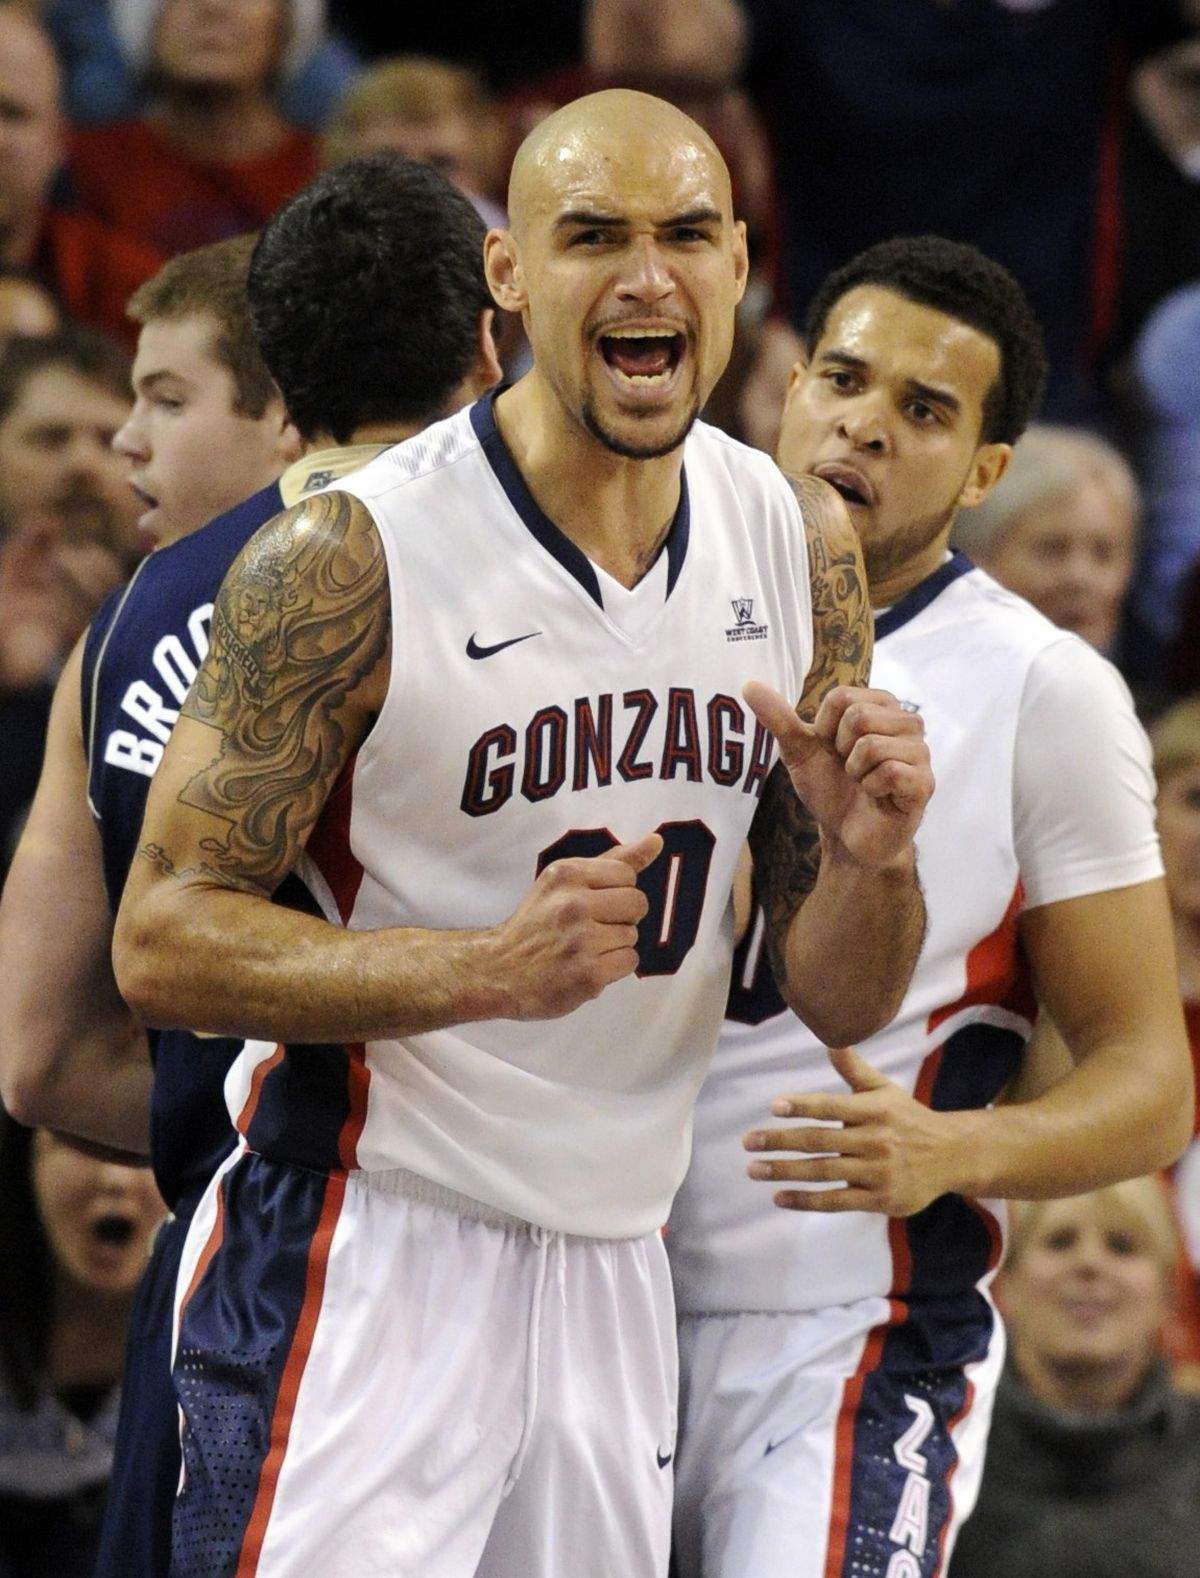 Gonzaga’s Robert Sacre celebrates a basket during the first half against Notre Dame. (Colin Mulvany)